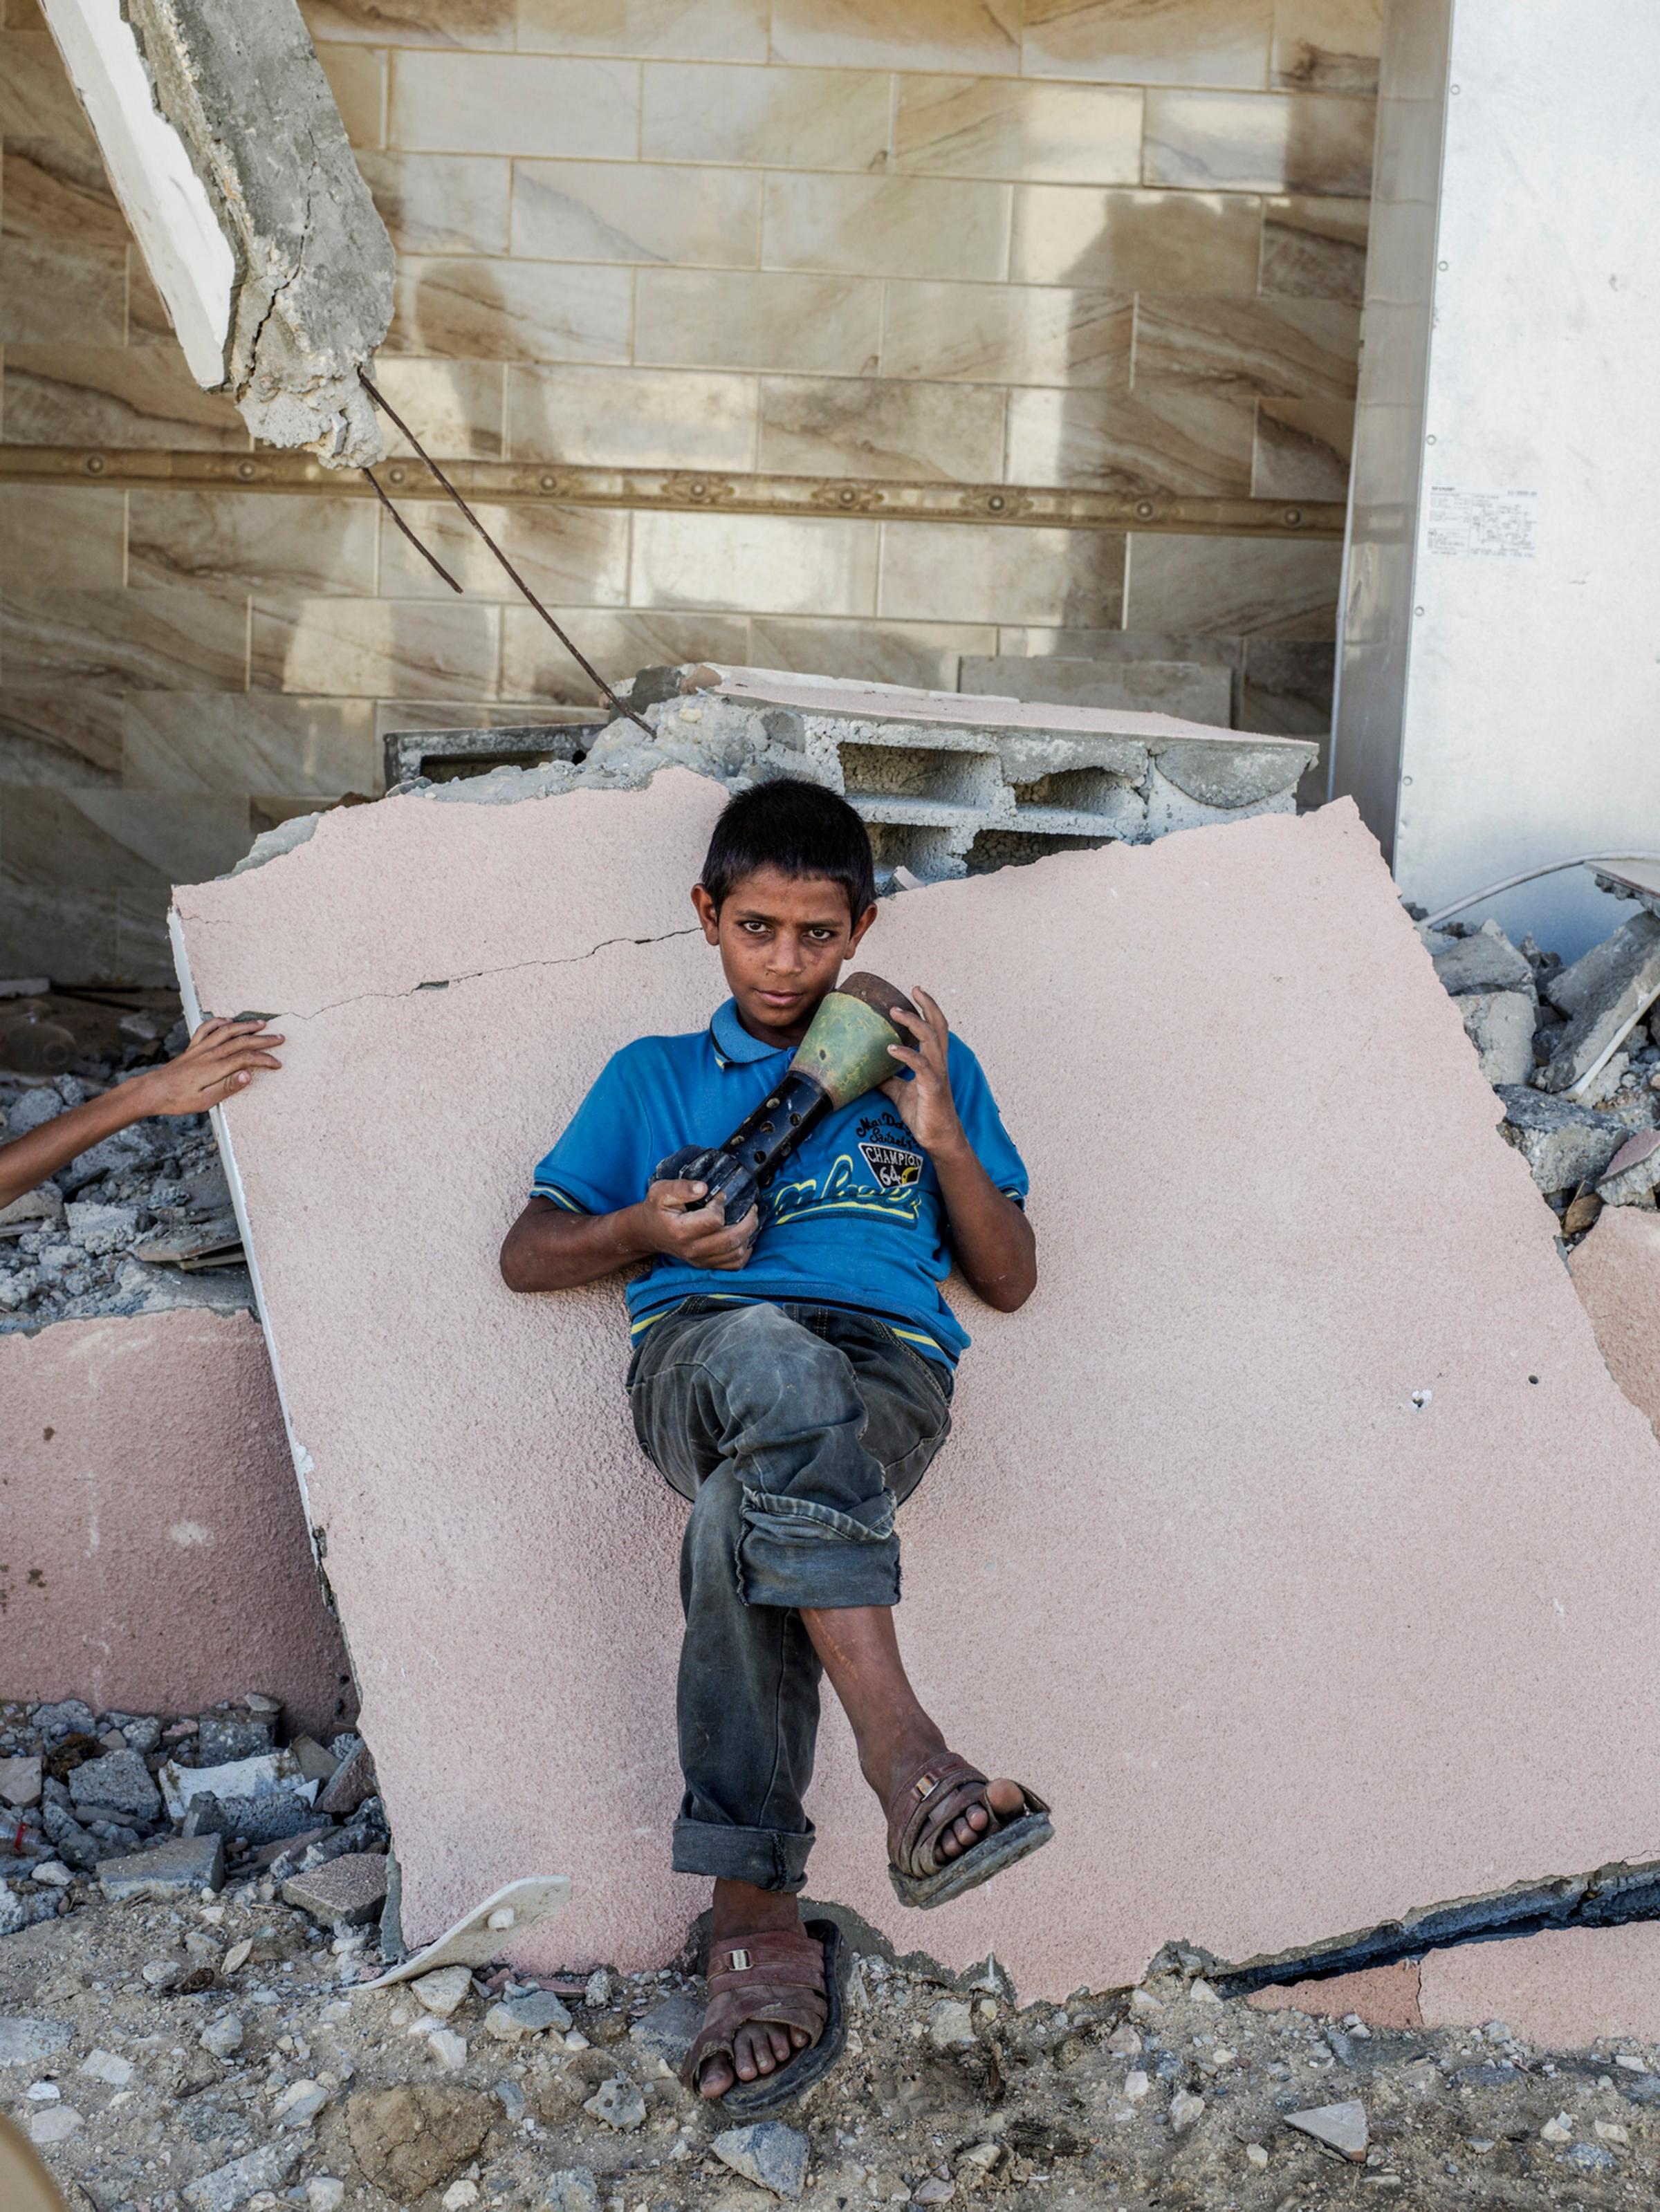 2014.  Gaza.  Palestine. A child with an Israeli mortar shell in a neighborhood destroyed near Rafah in southern Gaza.  Operation Protective Edge lasted from 8 July 2014 – 26 August 2014, killing 2,189 Palestinians of which 1,486 are believed to be civilians. 66 Israeli soldiers and 6 civilians were killed.  It's estimated that 4,564 rockets were fired at Israel by Palestinian militants.